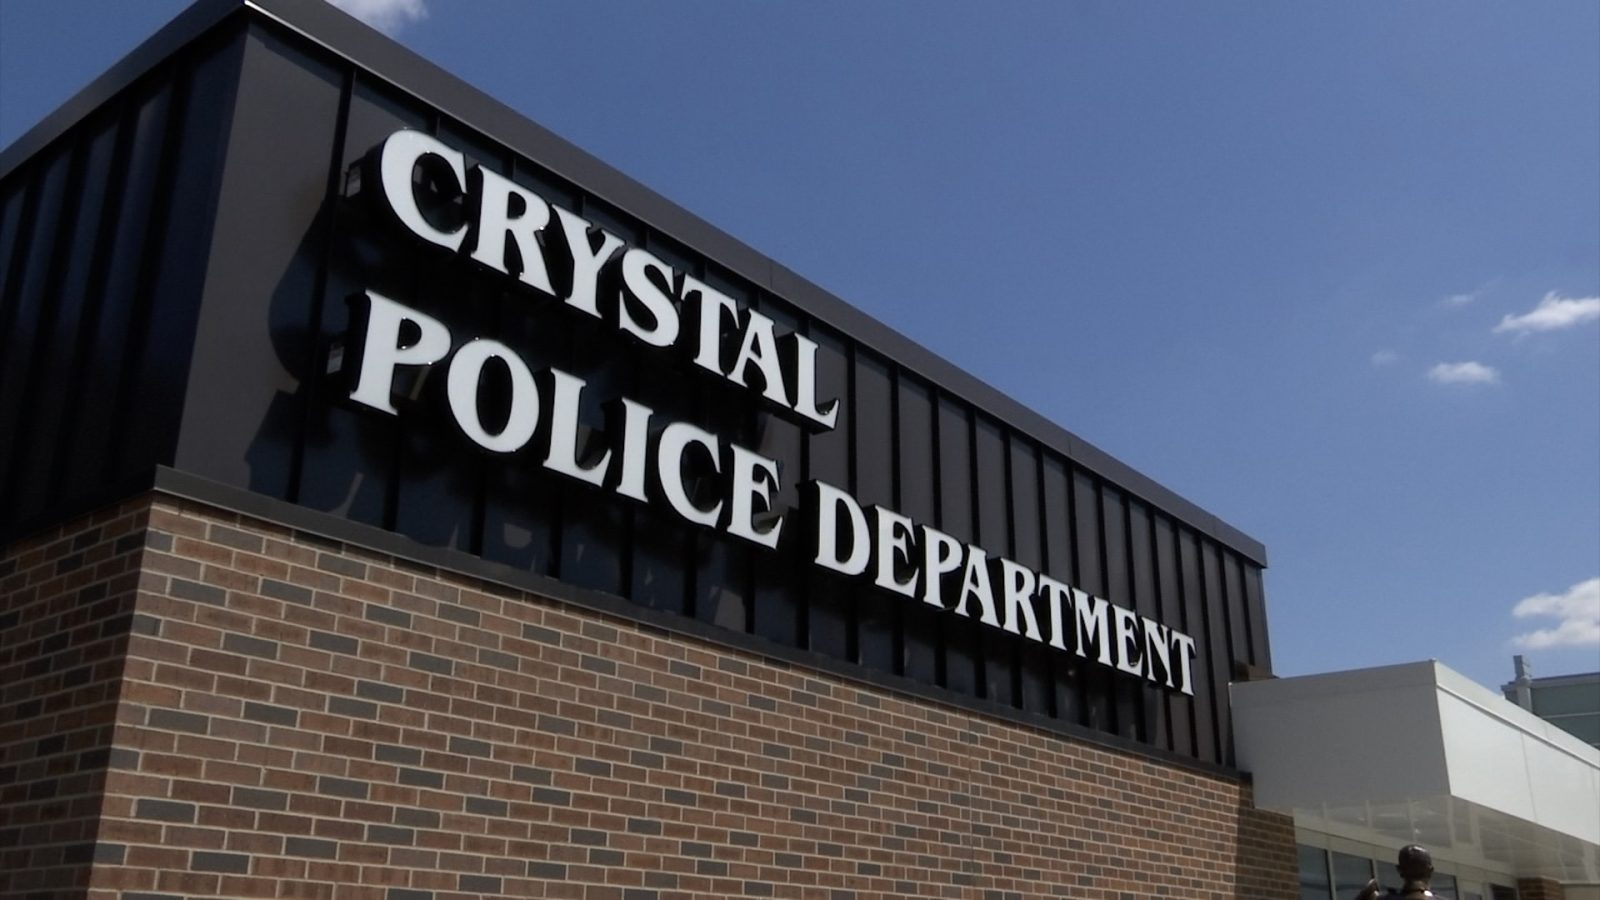 Crystal Police Department